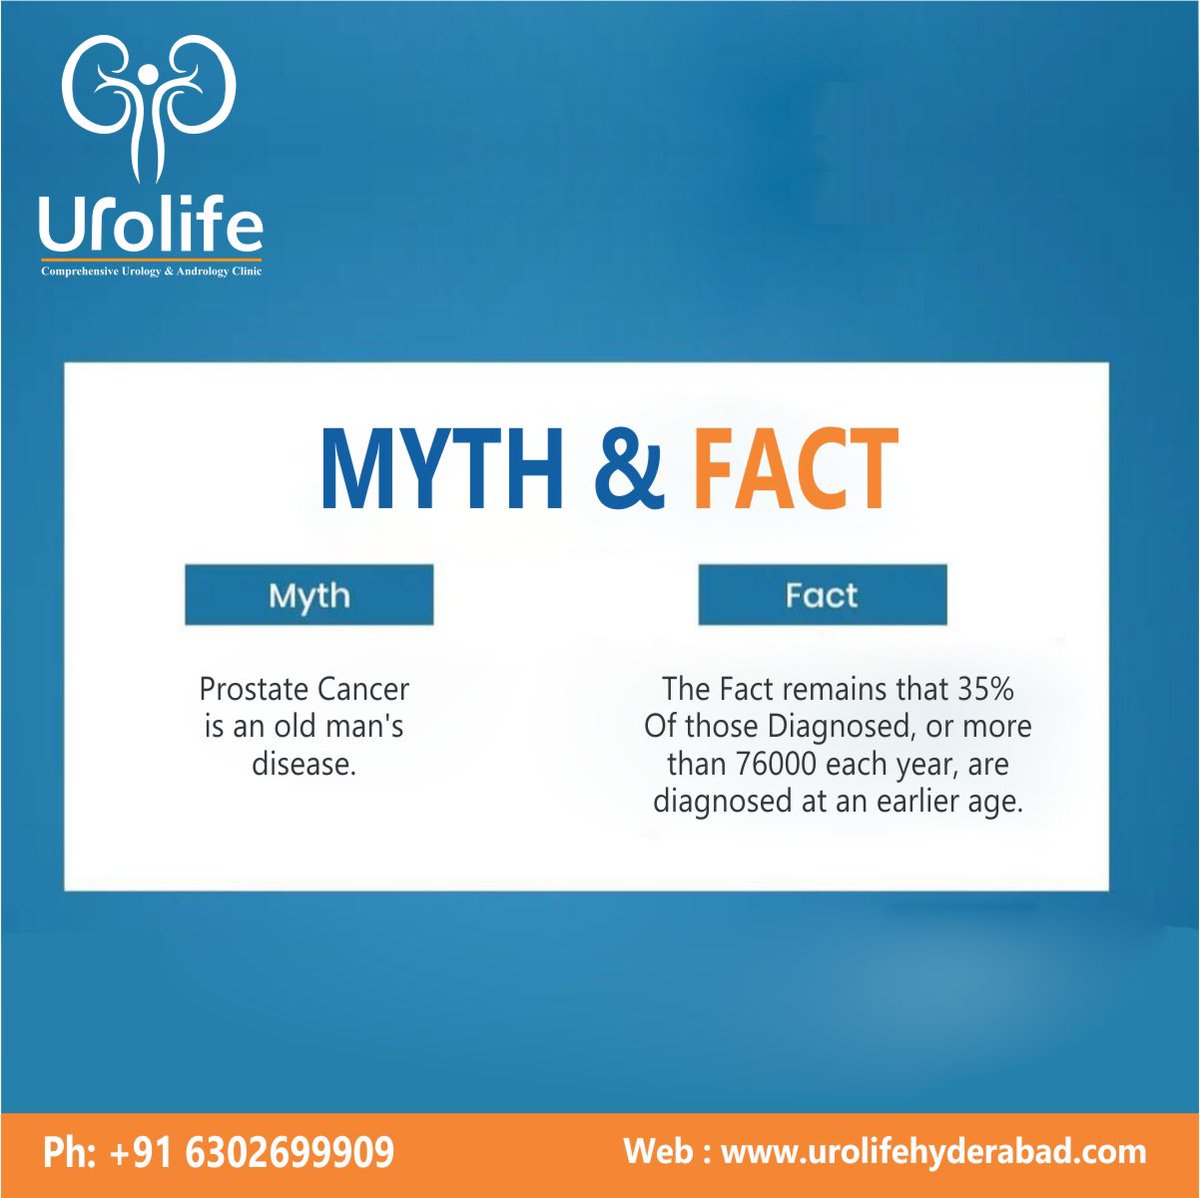 Myth & fact

Myth
Prostate cancer is an old man's disease 

Fact
The fact remains that 35% of those diagnosed, or more than 76000 each year, are diagnosed at an earlier age.

#PROSTATE #ProstateCancer #ProstateCancerTreatment #prostatecancersymptoms #urolife #urologycancer